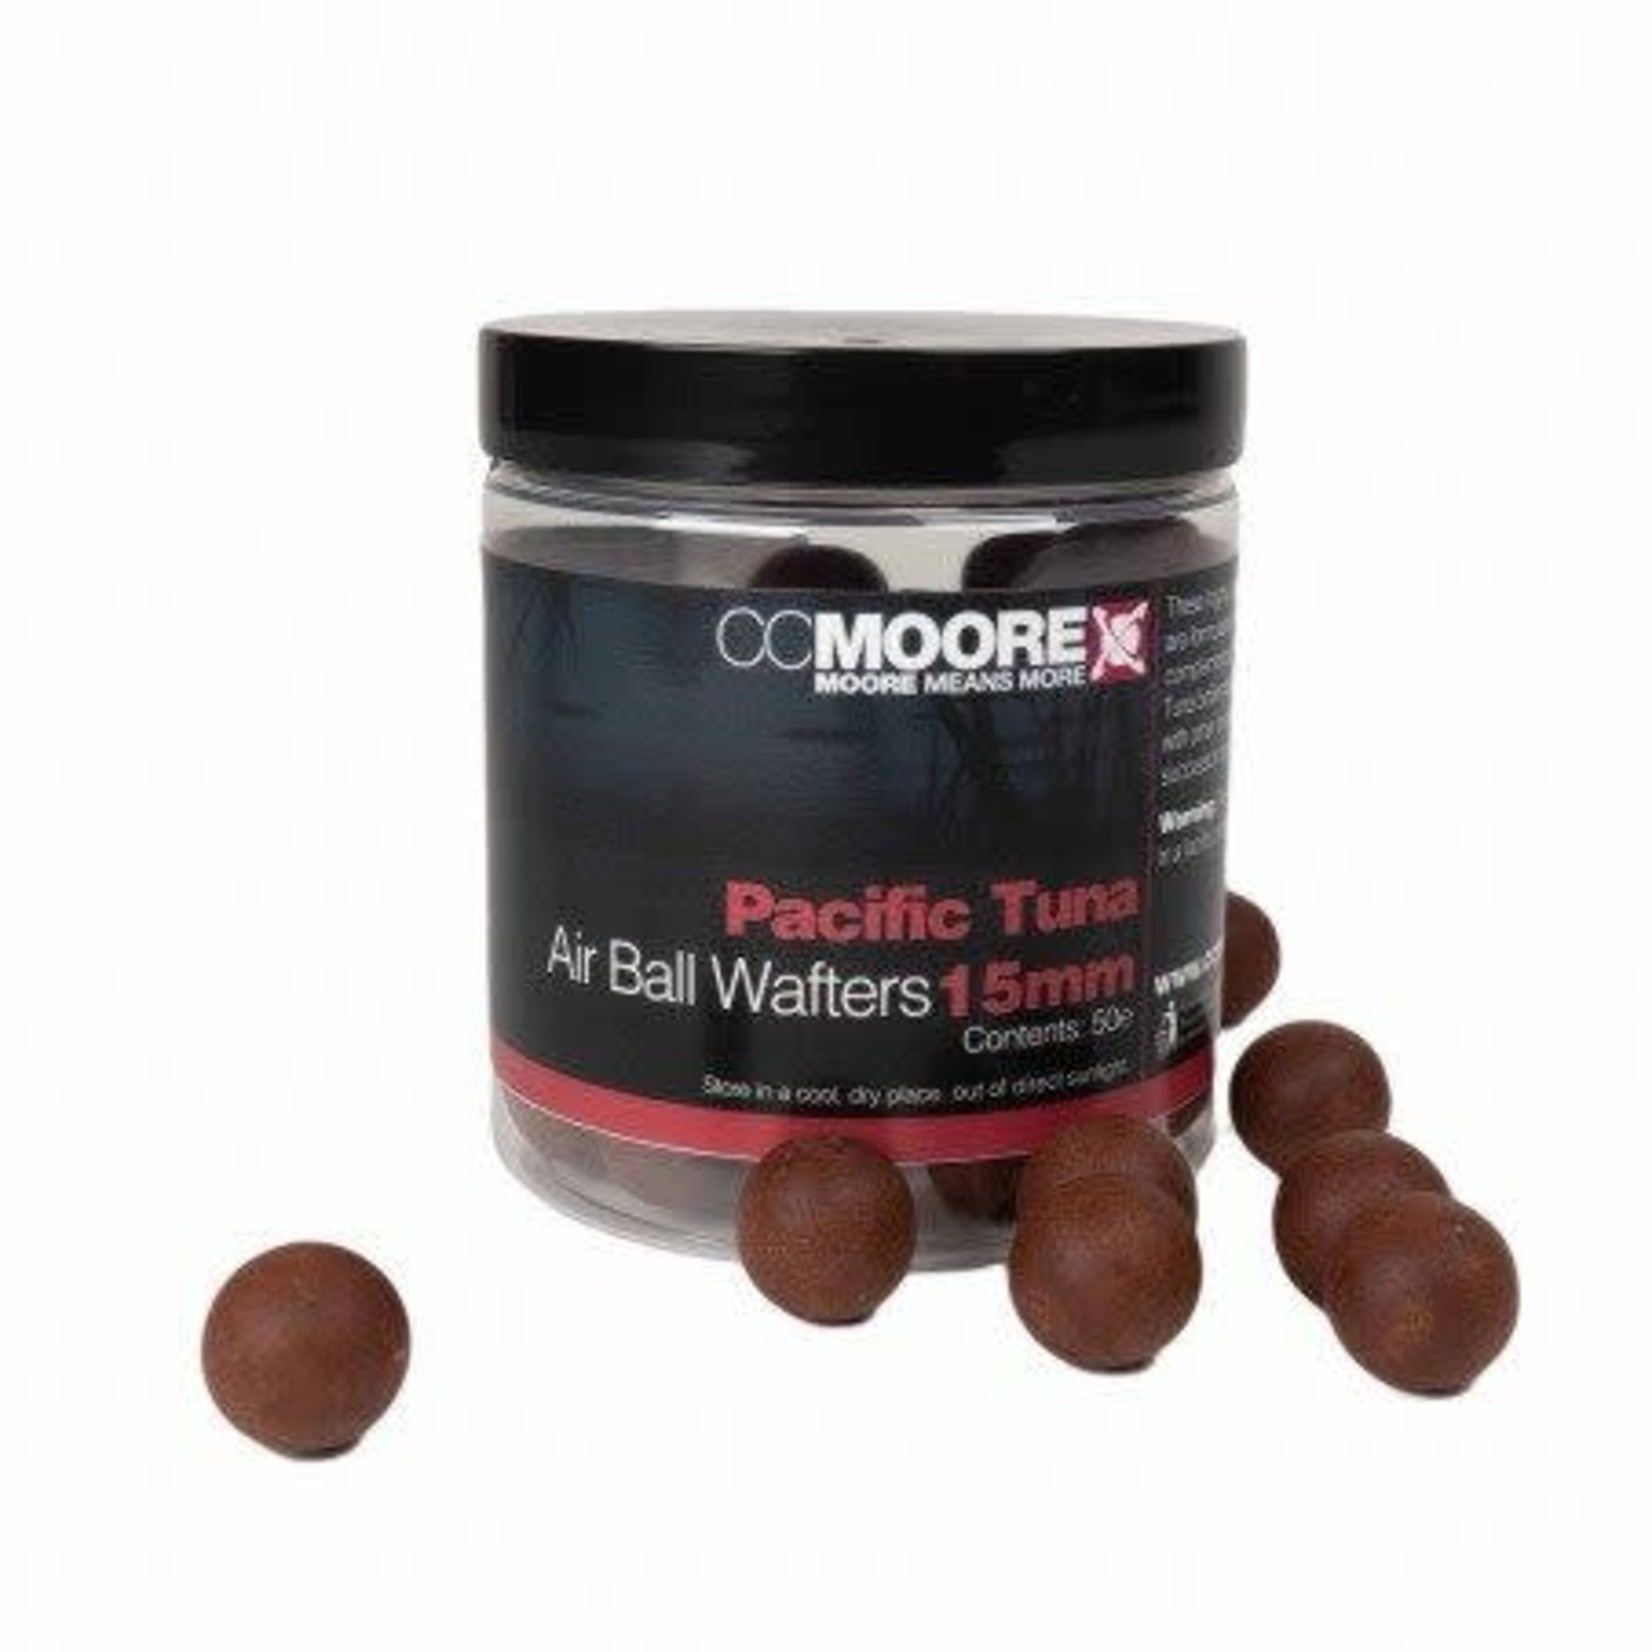 CCMOORE Pacific Tuna Air Ball Wafters